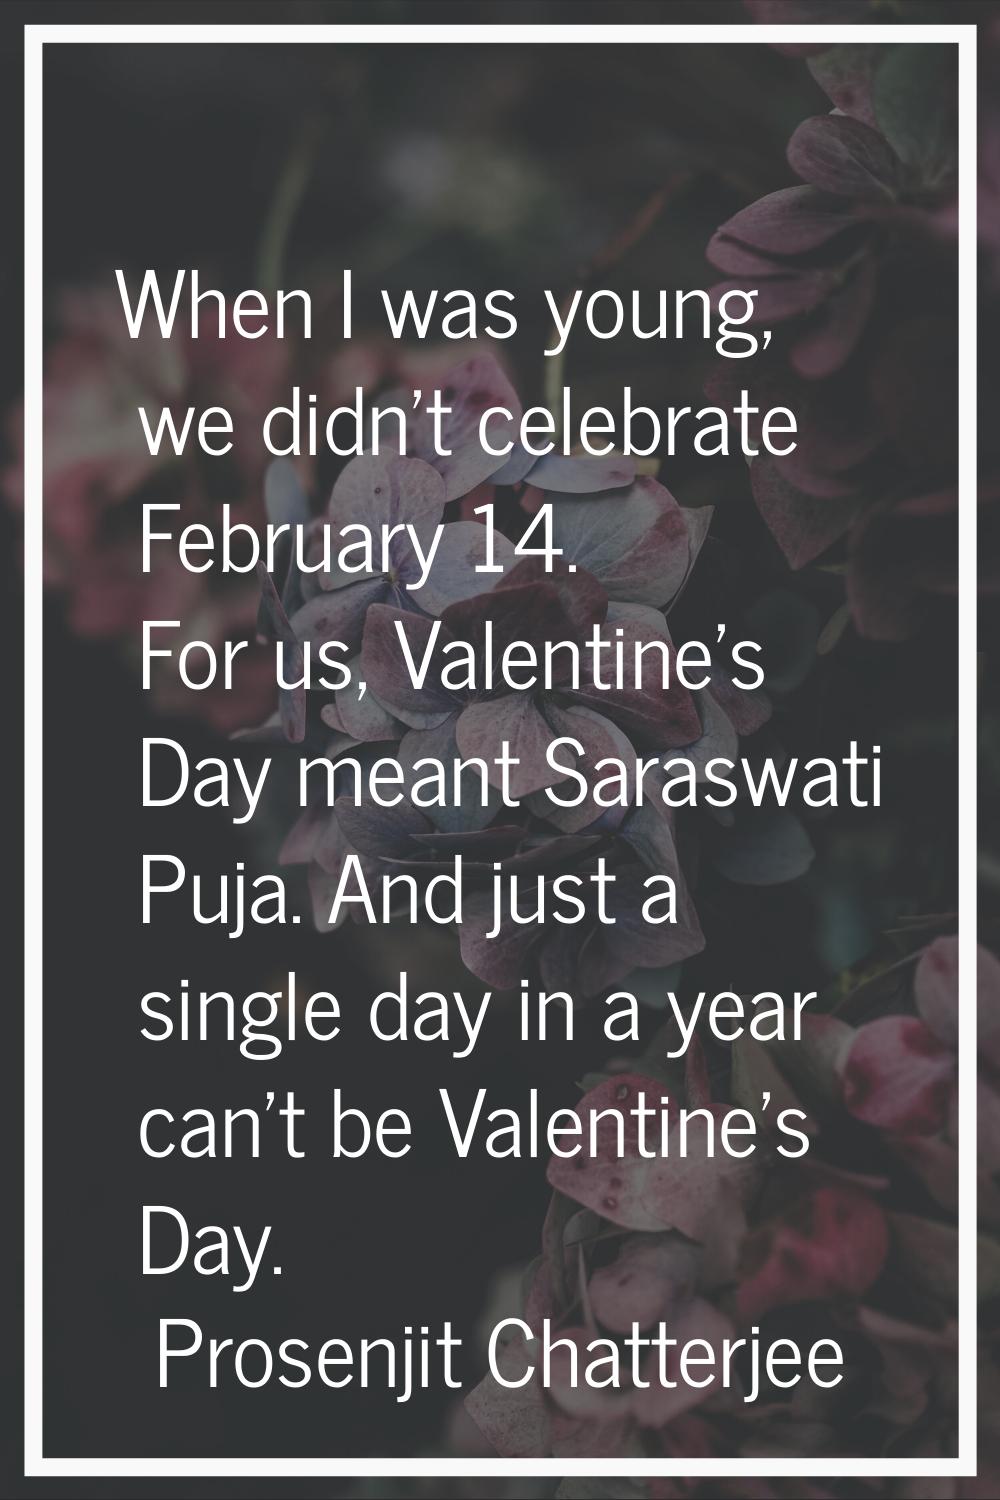 When I was young, we didn't celebrate February 14. For us, Valentine's Day meant Saraswati Puja. An